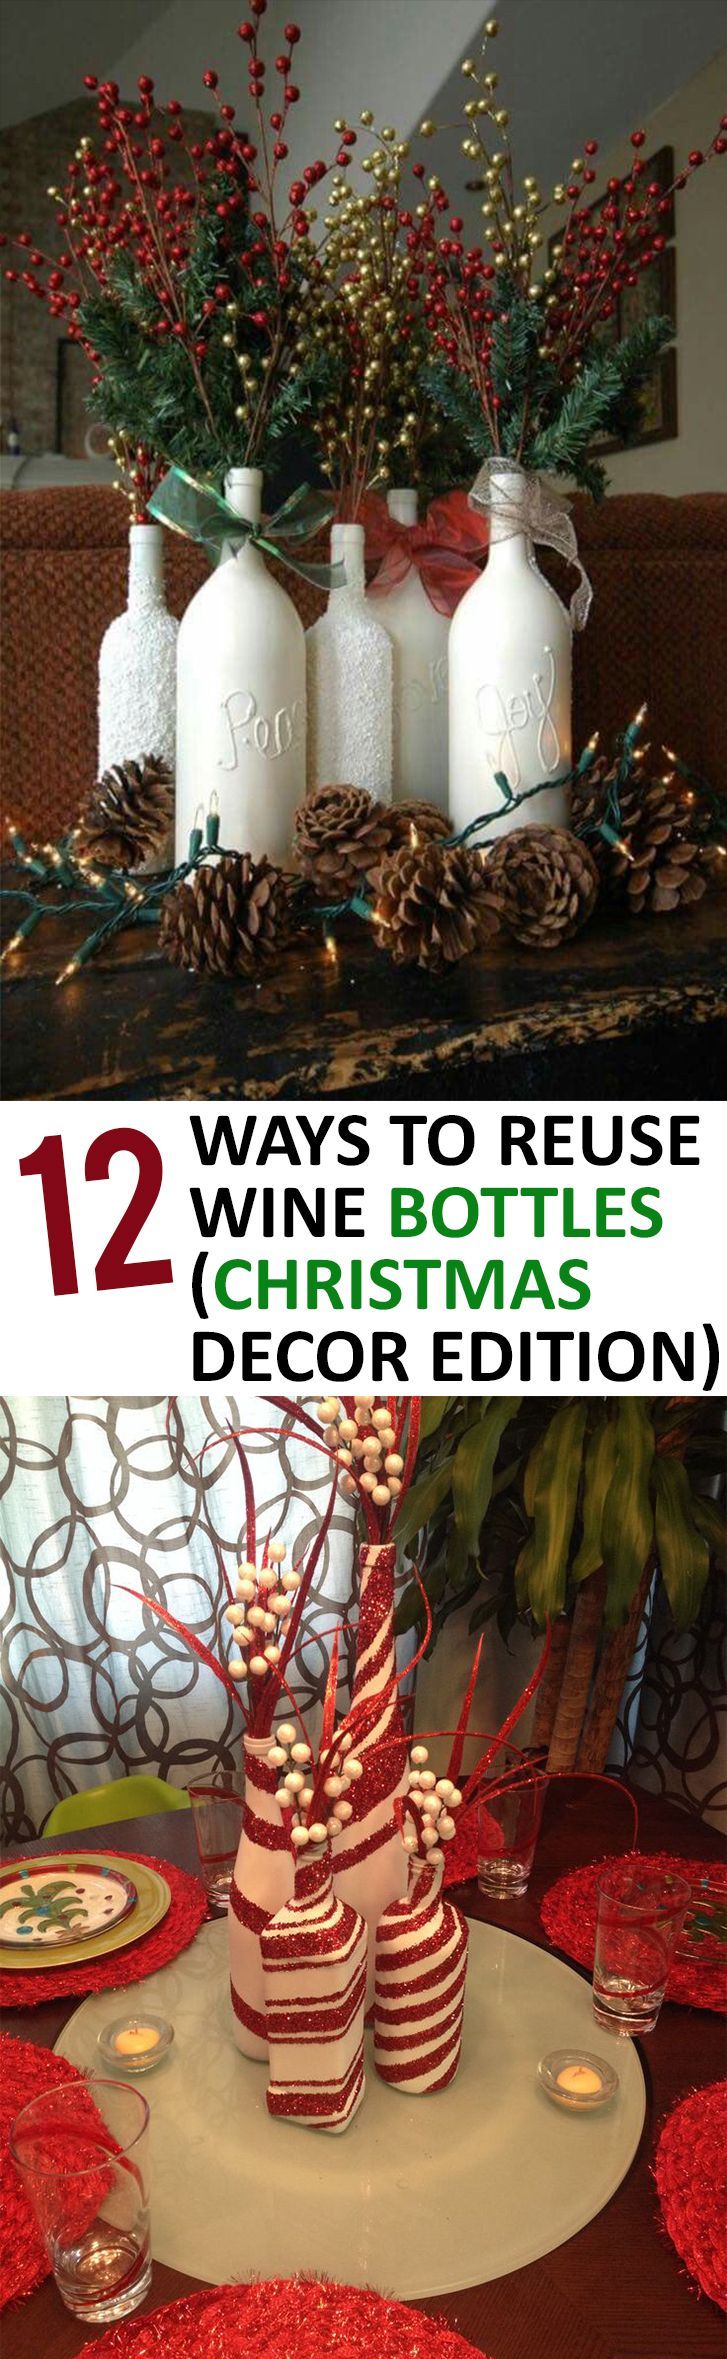 Christmas, Things to Do With Wine Bottles, How to Repurpose Wine Bottles, DIy Christmas Decor, Wine Bottle Christmas Decorations,